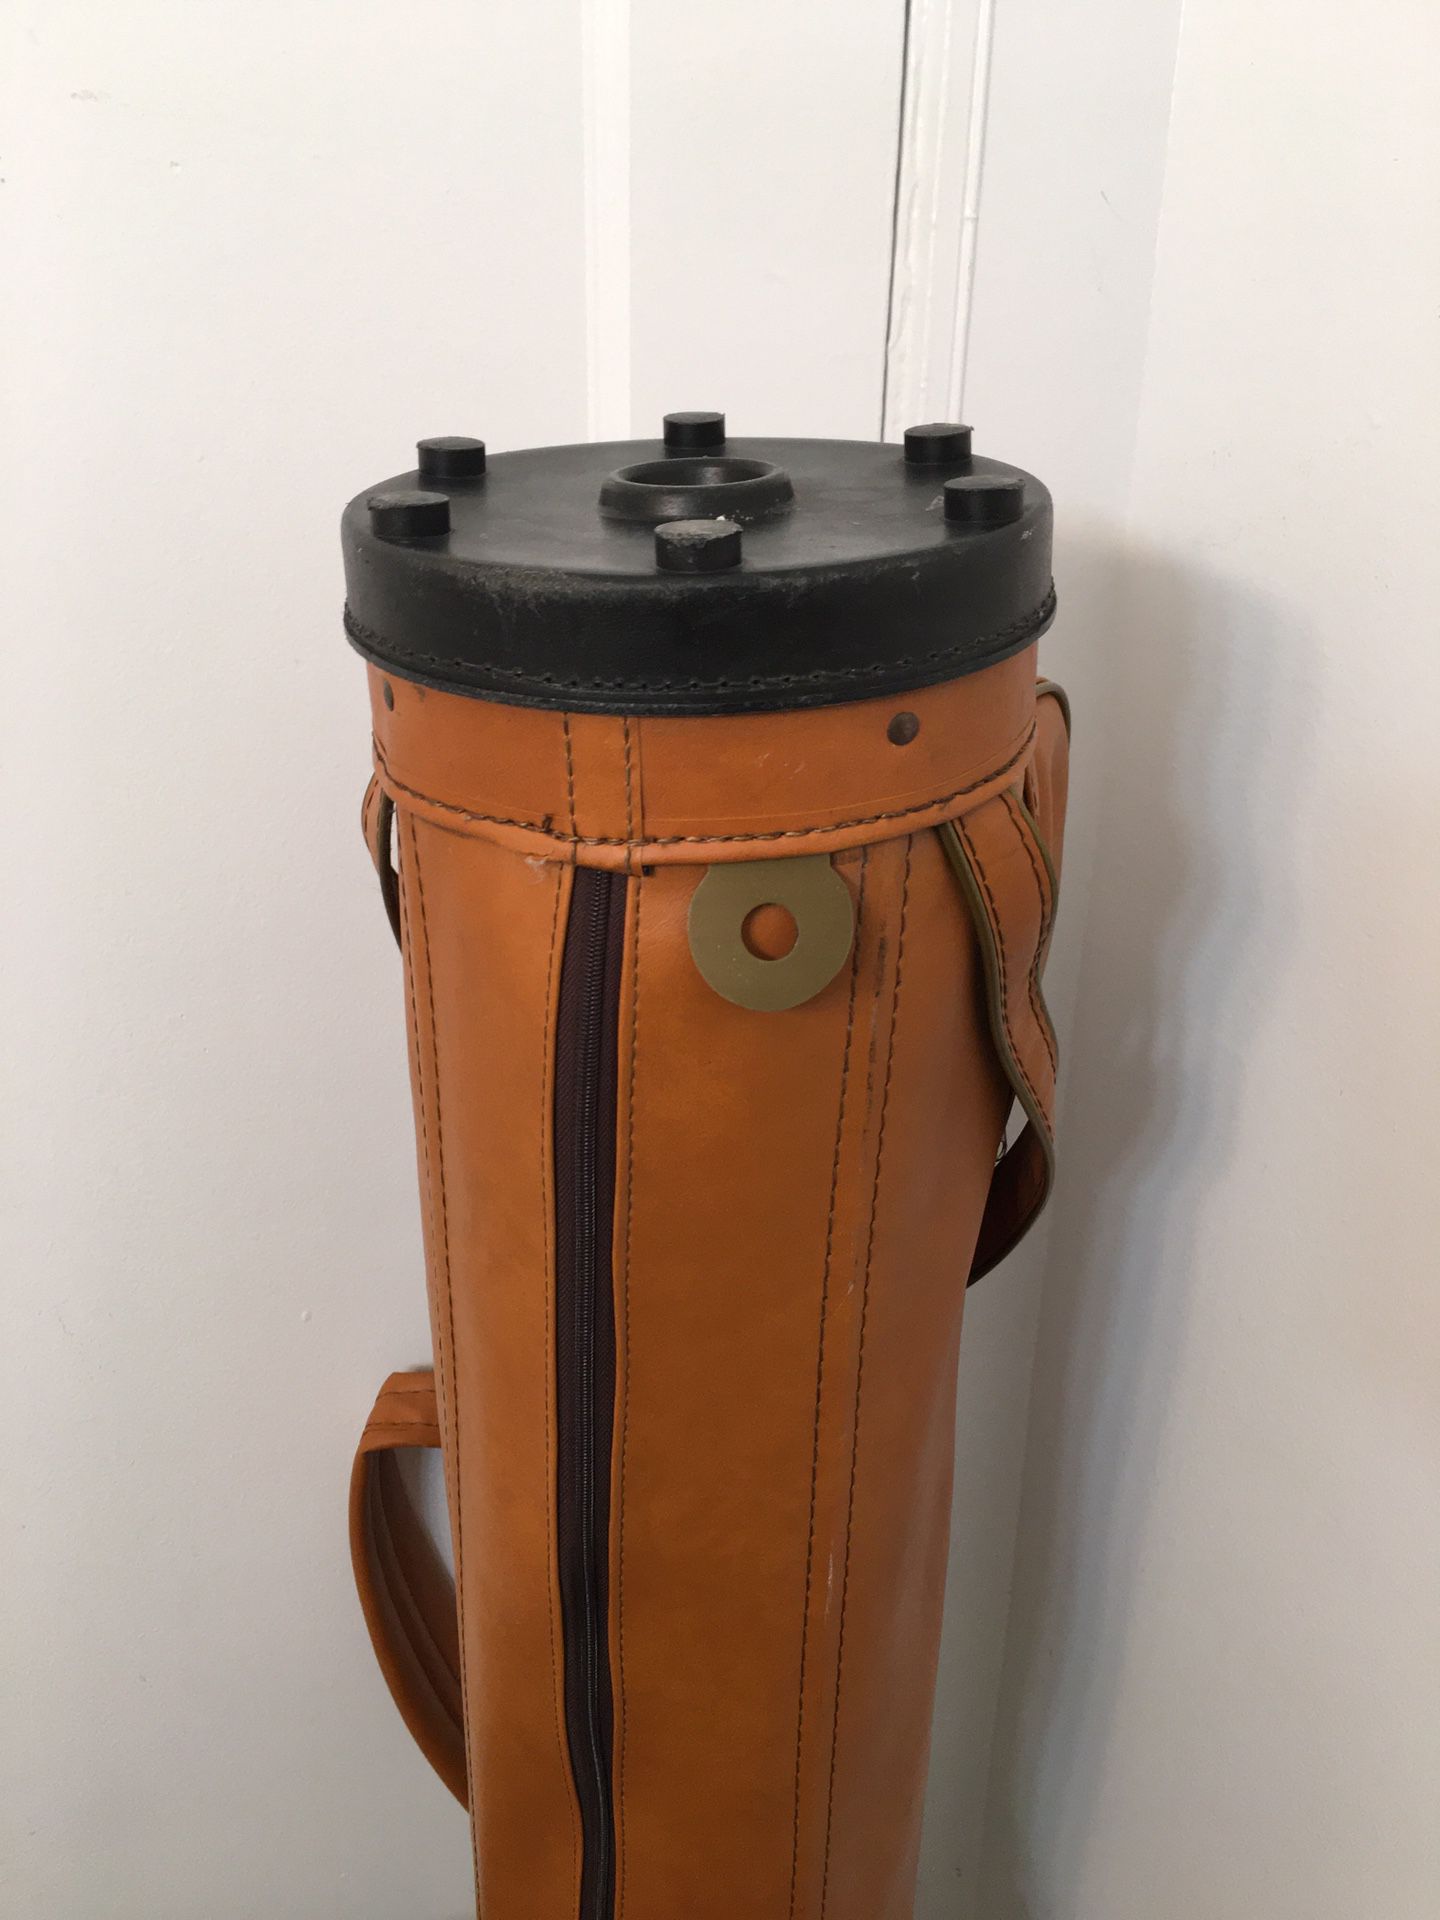 Vintage Leather Westchester Golf Bag for Sale in Chicago, IL - OfferUp